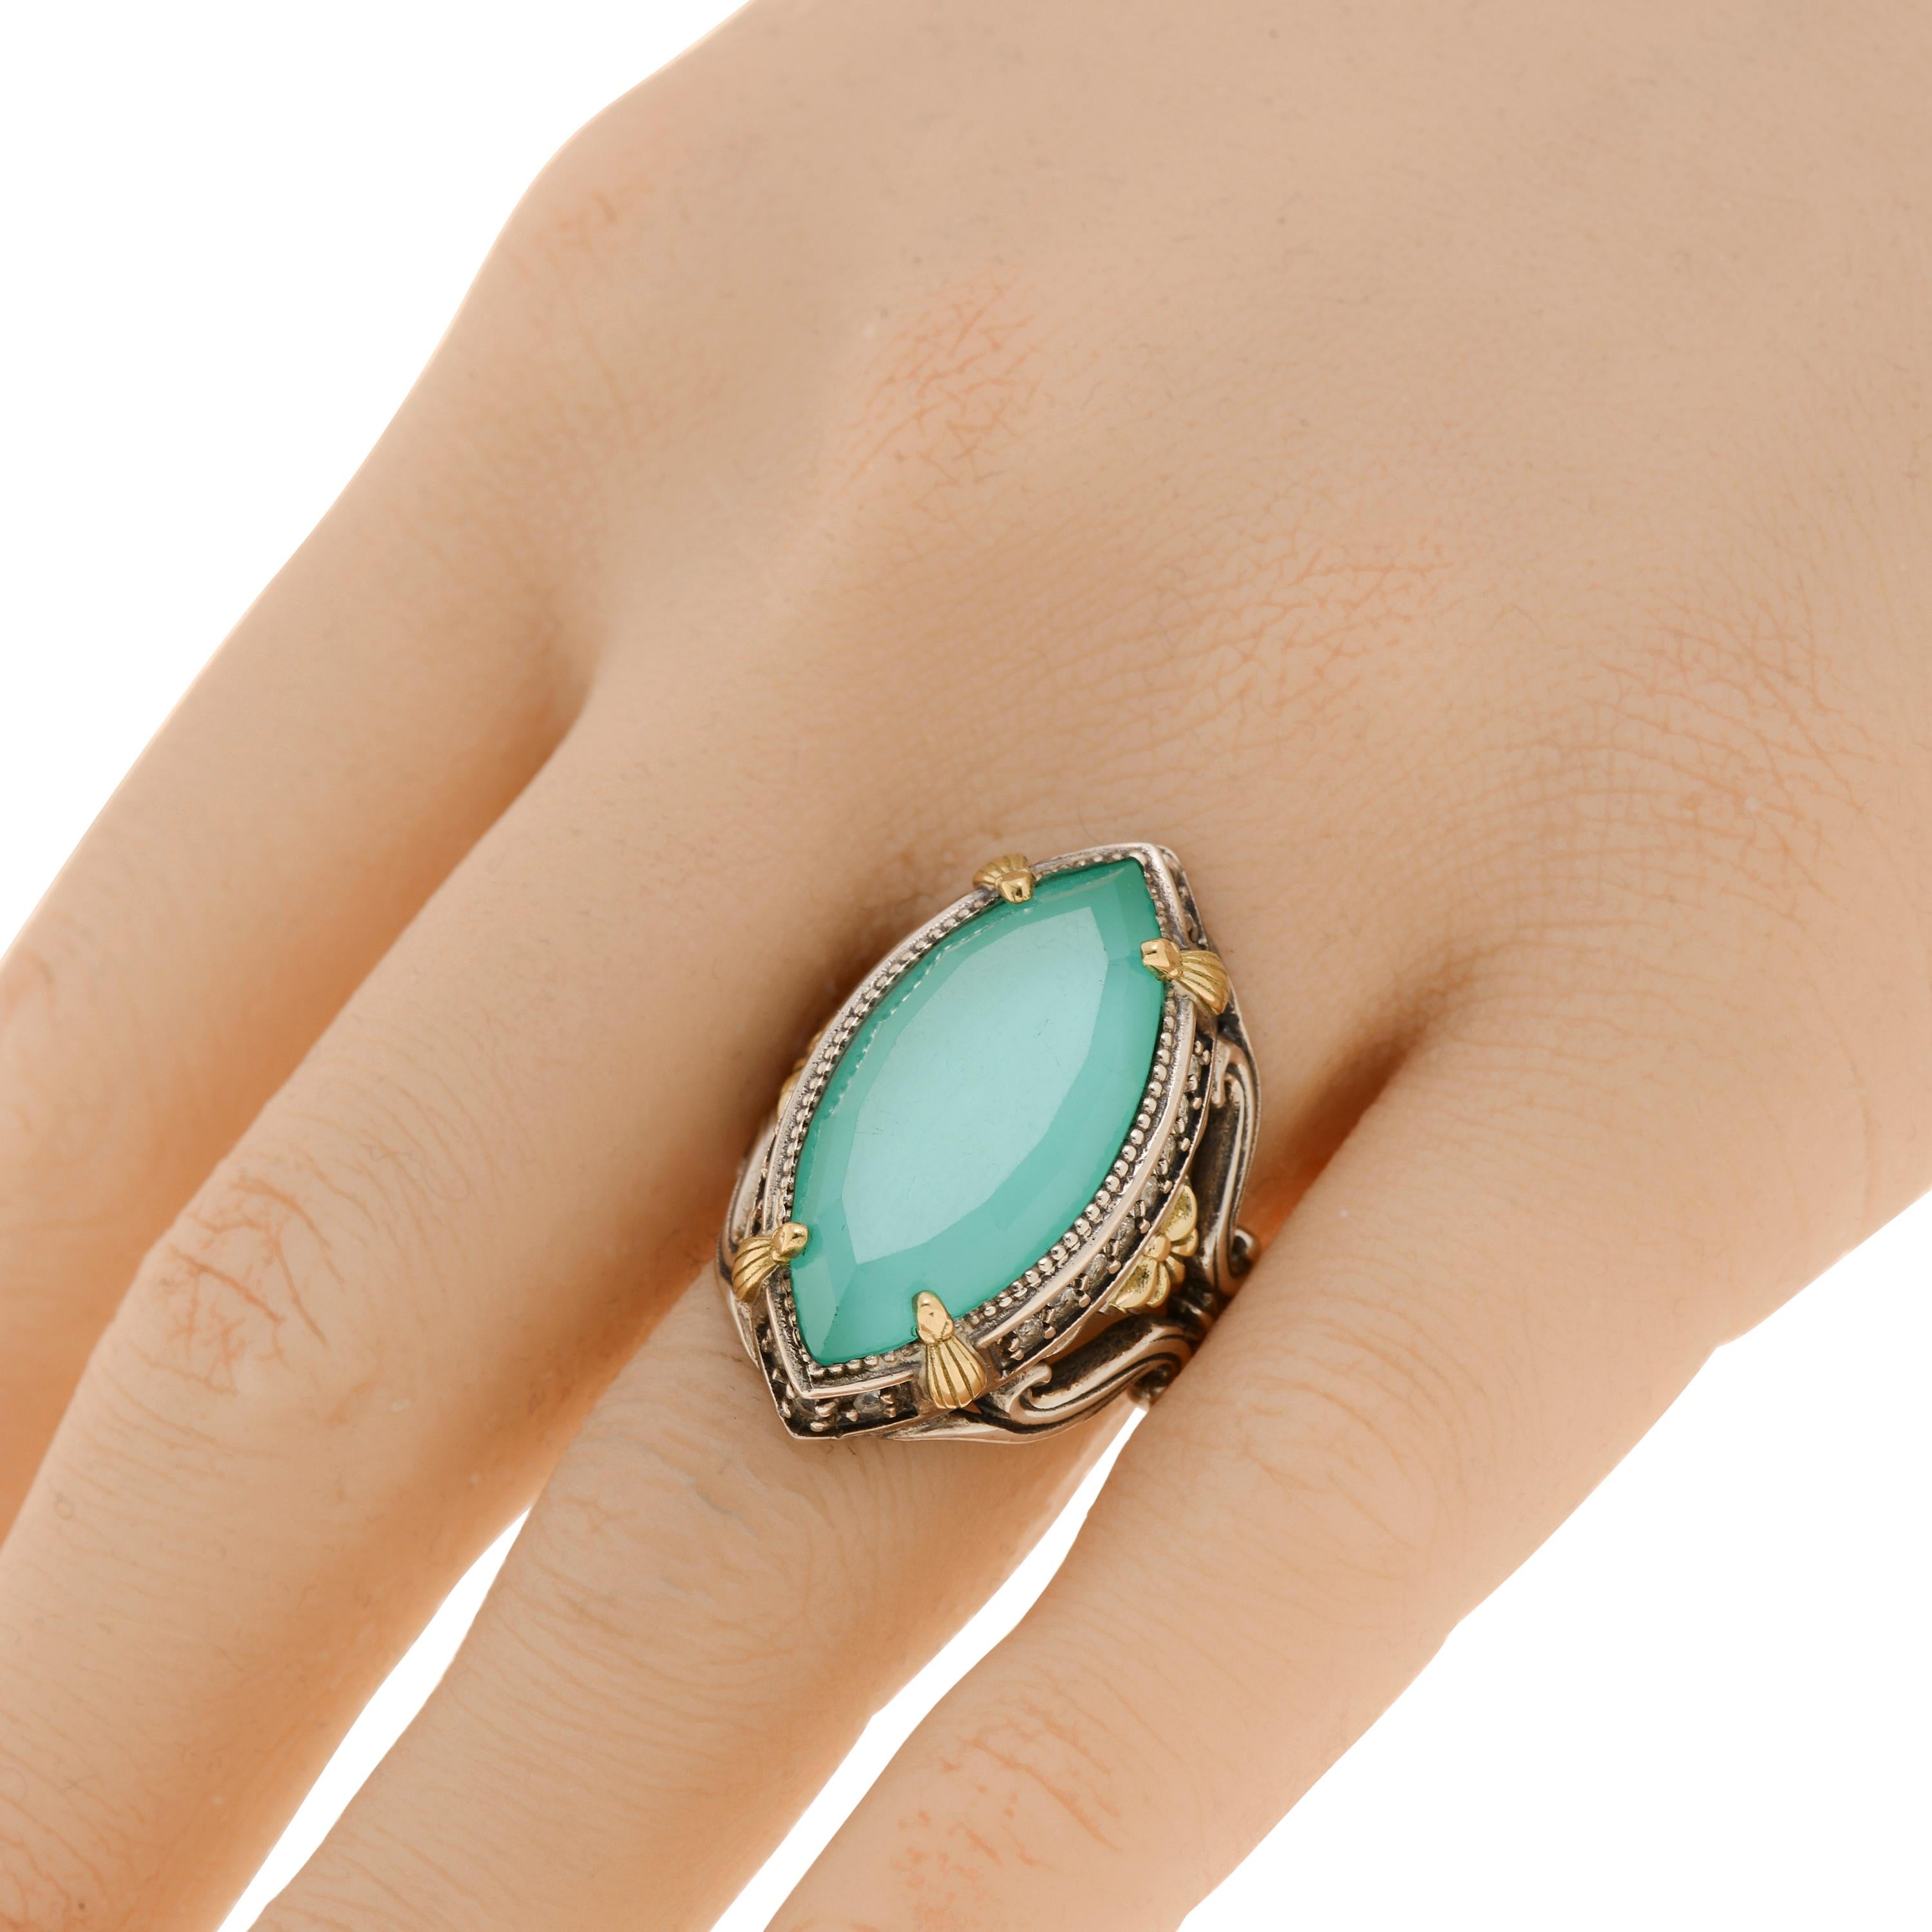 This eye-catching Konstantino ring features a teal chalcedony doublet center with white topaz, set in sterling silver with 18K yellow gold accents. The decoration size is 15/8” x 1 1/8”. The weight is 15g. The ring size is 6.75 (53.8).
